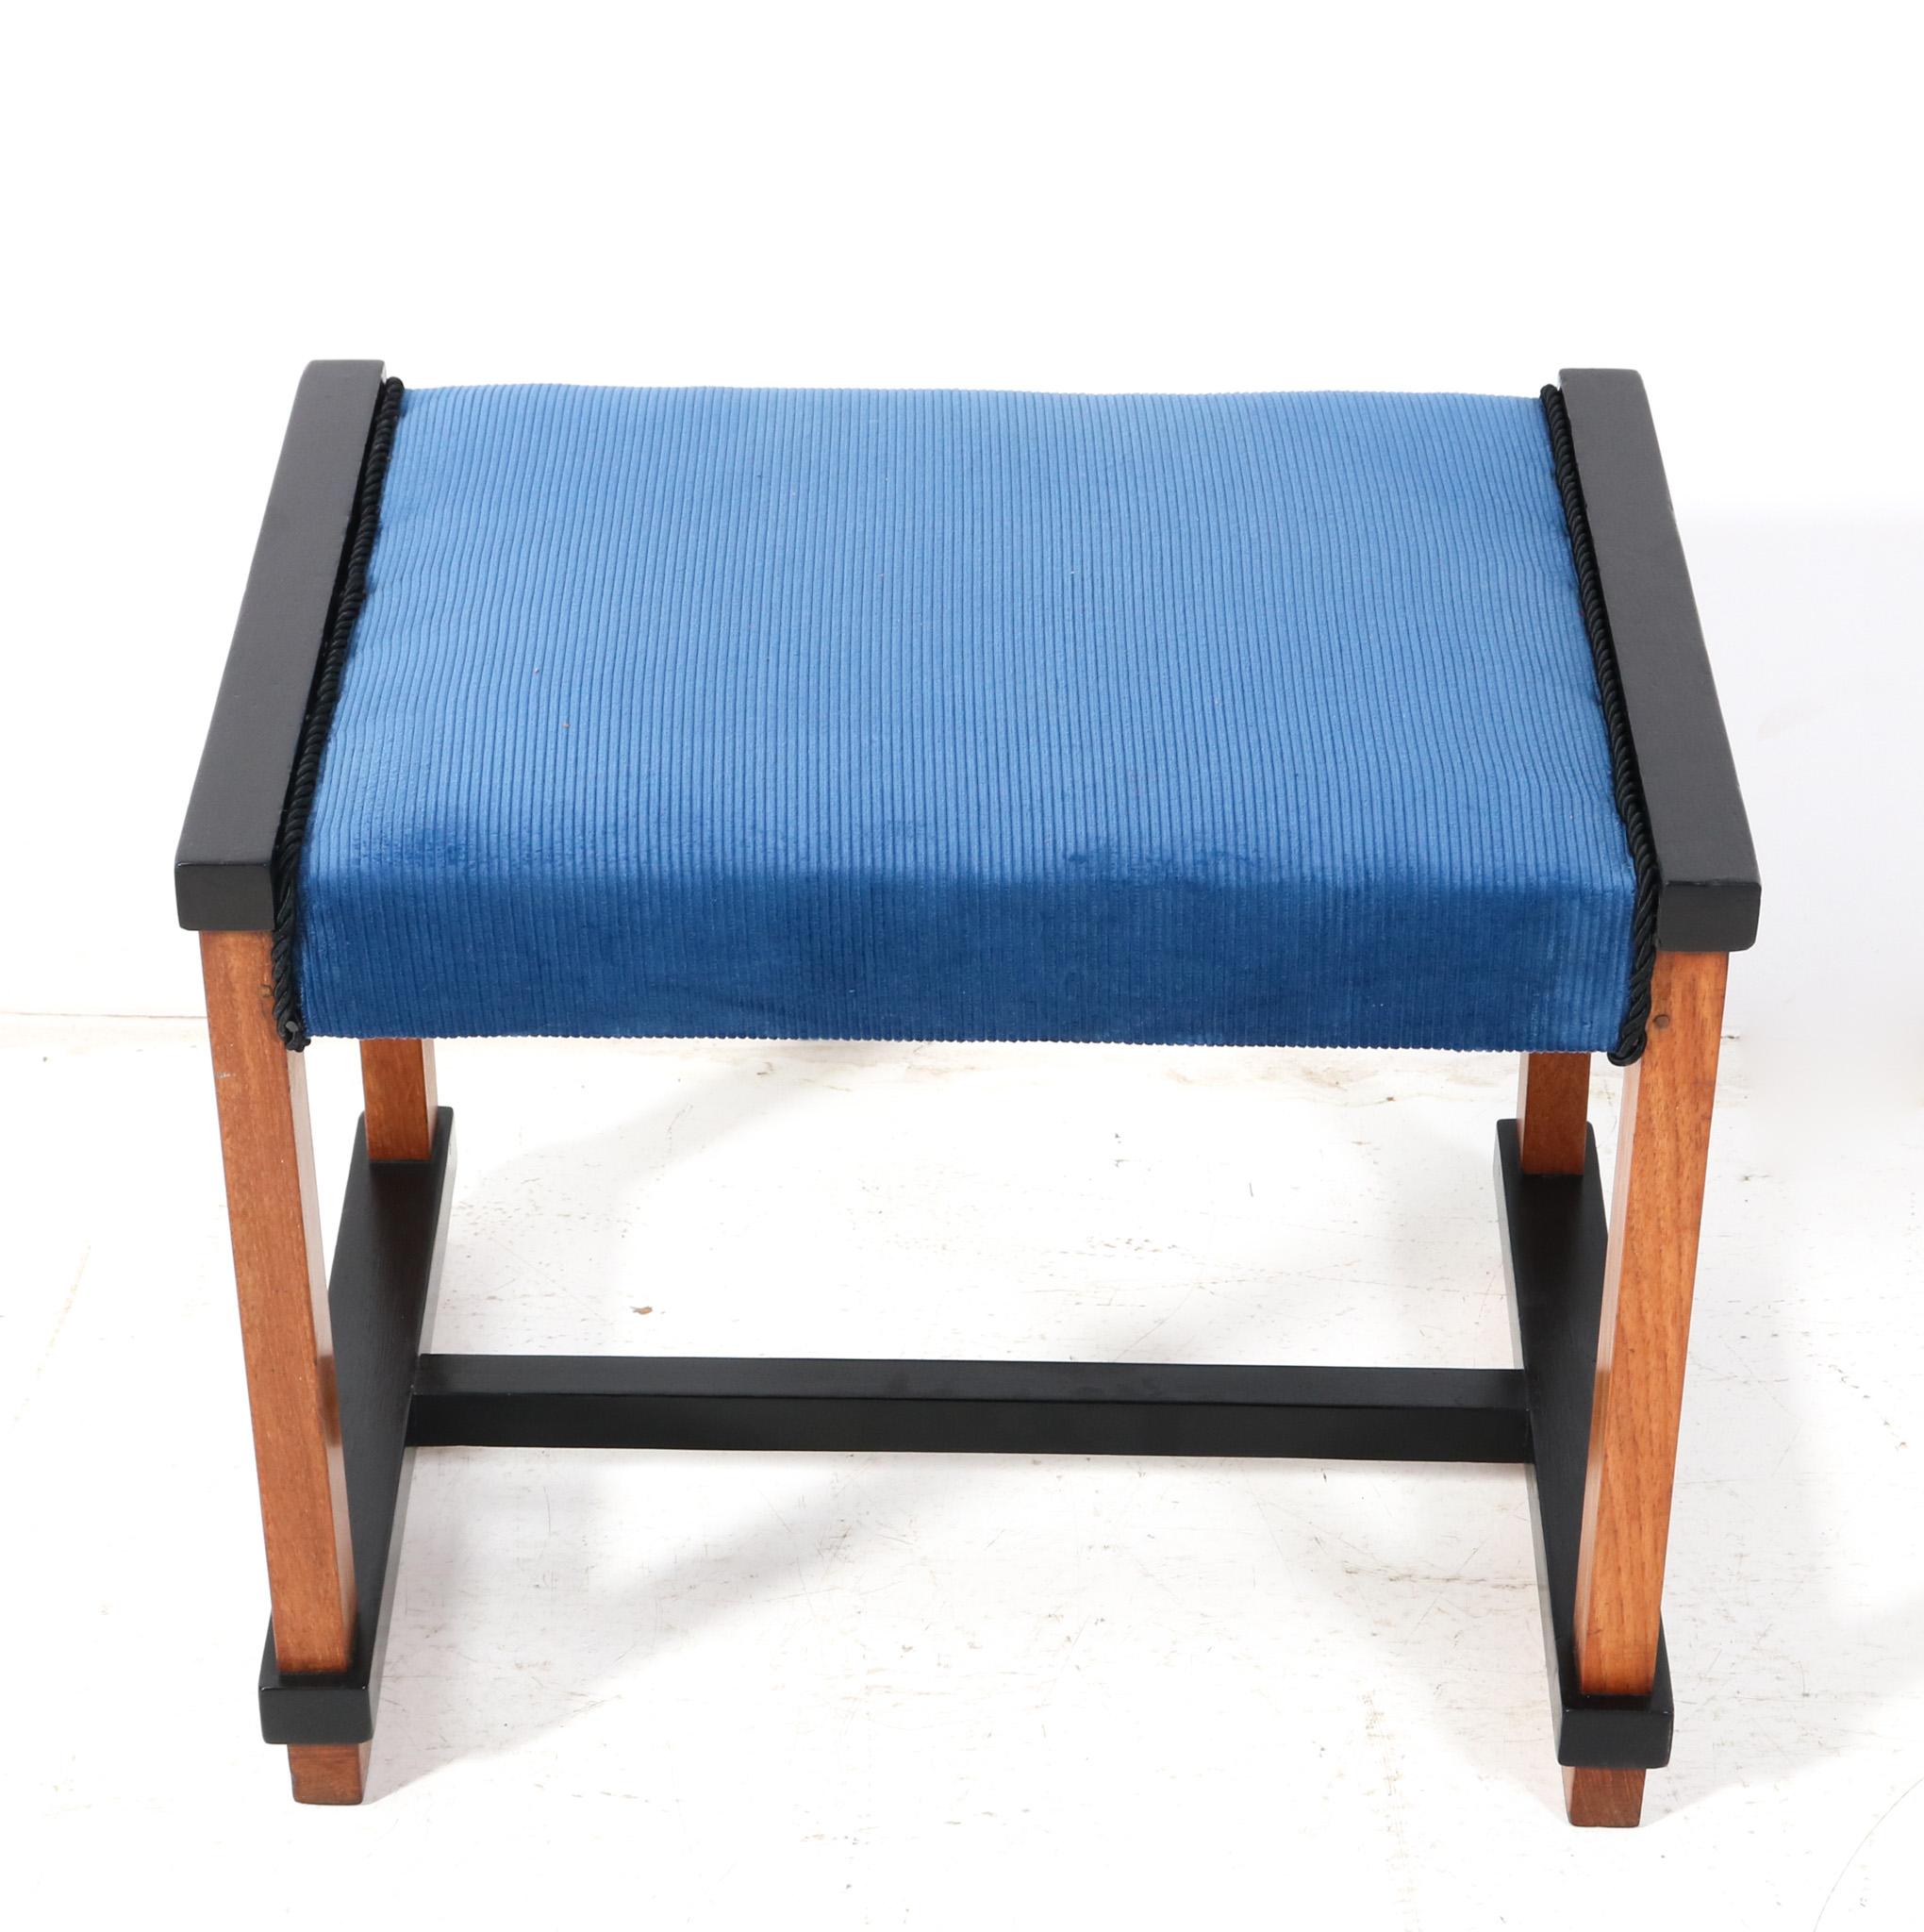 Stunning and rare Art Deco Modernist stool.
Design by Hendrik Wouda for H. Pander & Zonen Den Haag.
Striking Dutch design from the 1920s.
Solid teak frame with original black lacquered elements.
The top is re-upholstered with a blue Manchester